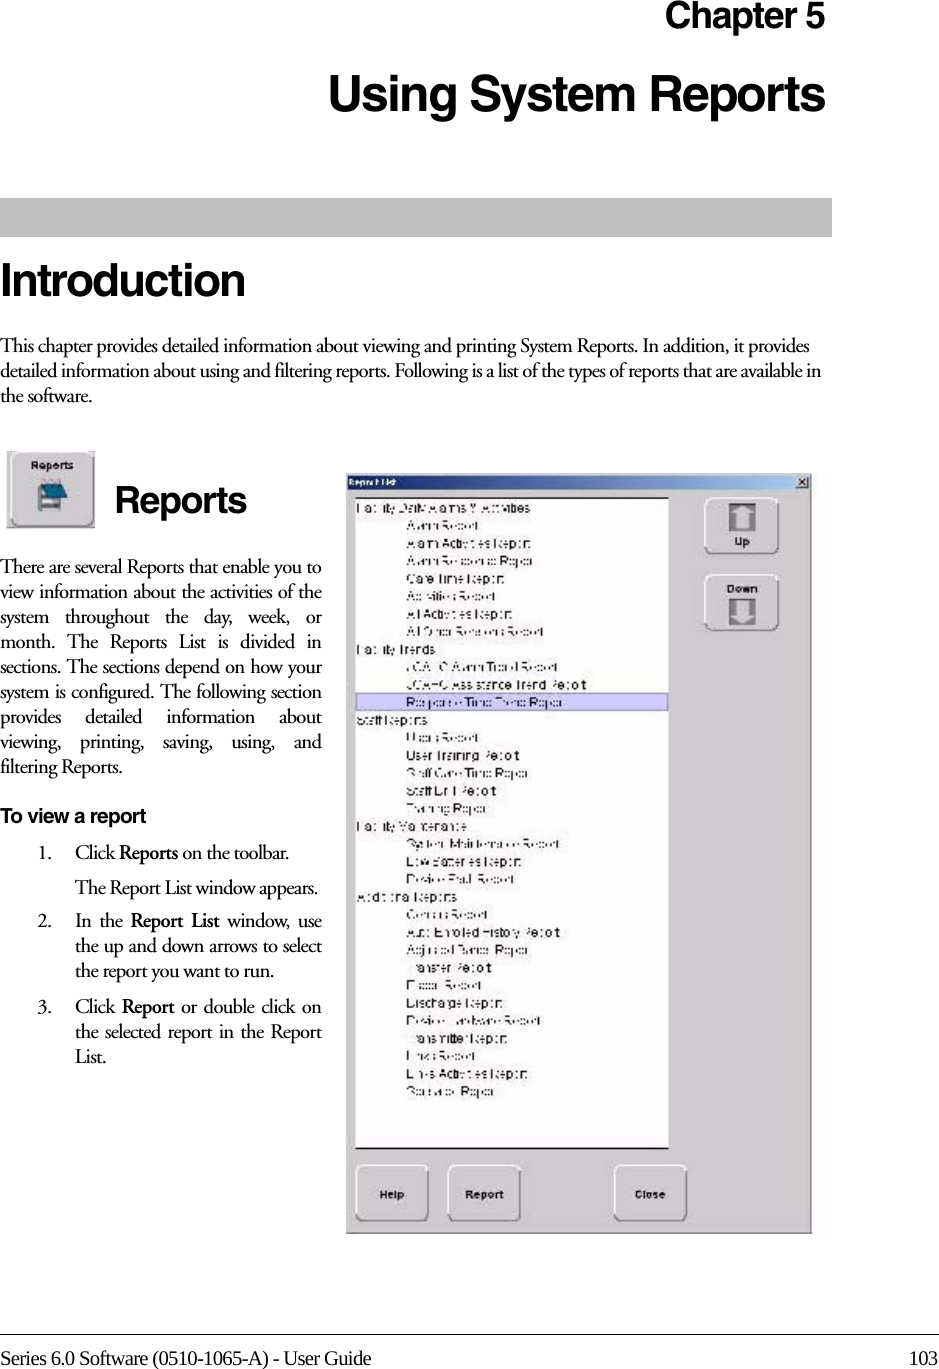 Series 6.0 Software (0510-1065-A) - User Guide 103Chapter 5Using System ReportsIntroductionThis chapter provides detailed information about viewing and printing System Reports. In addition, it provides detailed information about using and filtering reports. Following is a list of the types of reports that are available in the software. ReportsThere are several Reports that enable you to view information about the activities of the system throughout the day, week, or month. The Reports List is divided in sections. The sections depend on how your system is configured. The following section provides detailed information about viewing, printing, saving, using, and filtering Reports.To view a report1.    Click Reports on the toolbar.The Report List window appears. 2.    In  the  Report List window, use the up and down arrows to select the report you want to run.3.    Click  Report or double click on the selected report in the Report List.